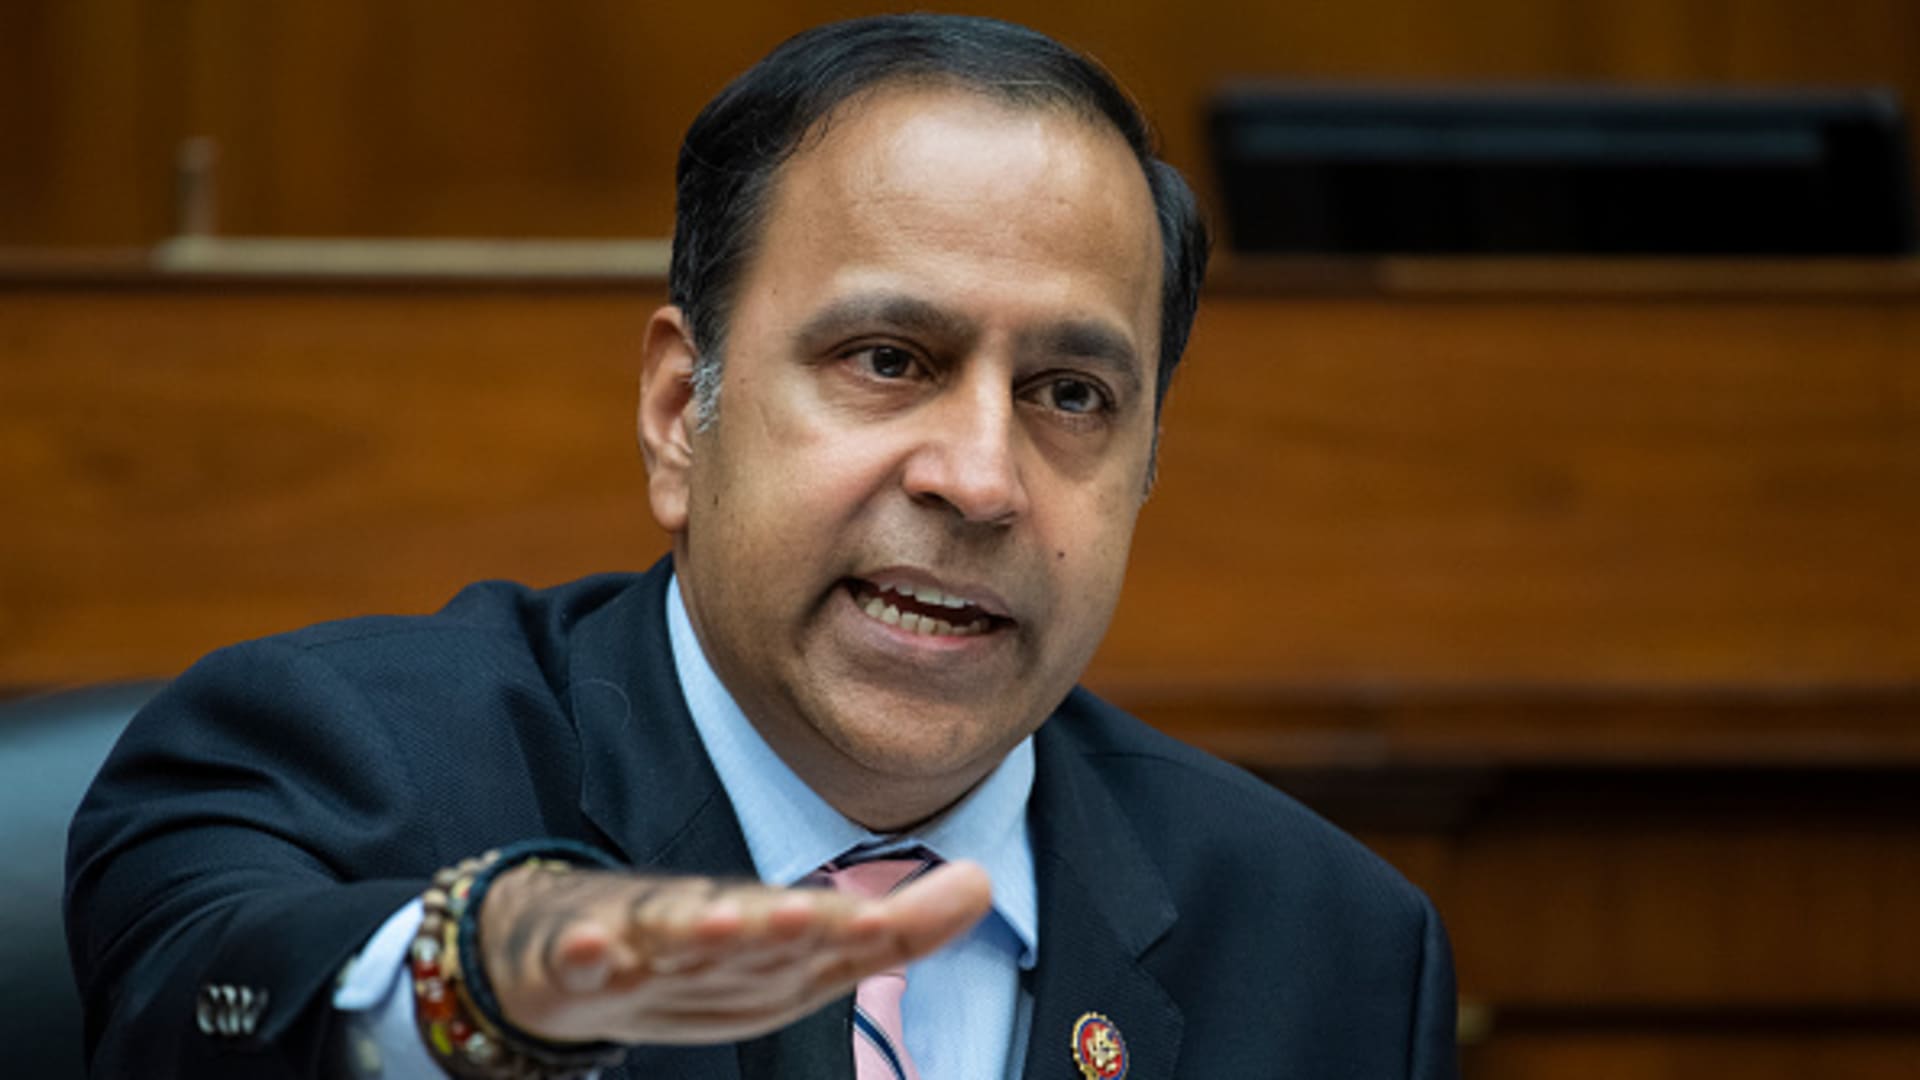 Rep. Raja Krishnamoorthi, D-Ill., during the House Oversight and Reform Committee hearing titled Protecting the Timely Delivery of Mail, Medicine, and Mail-in Ballots, in Rayburn House Office Building on Monday, August 24, 2020.